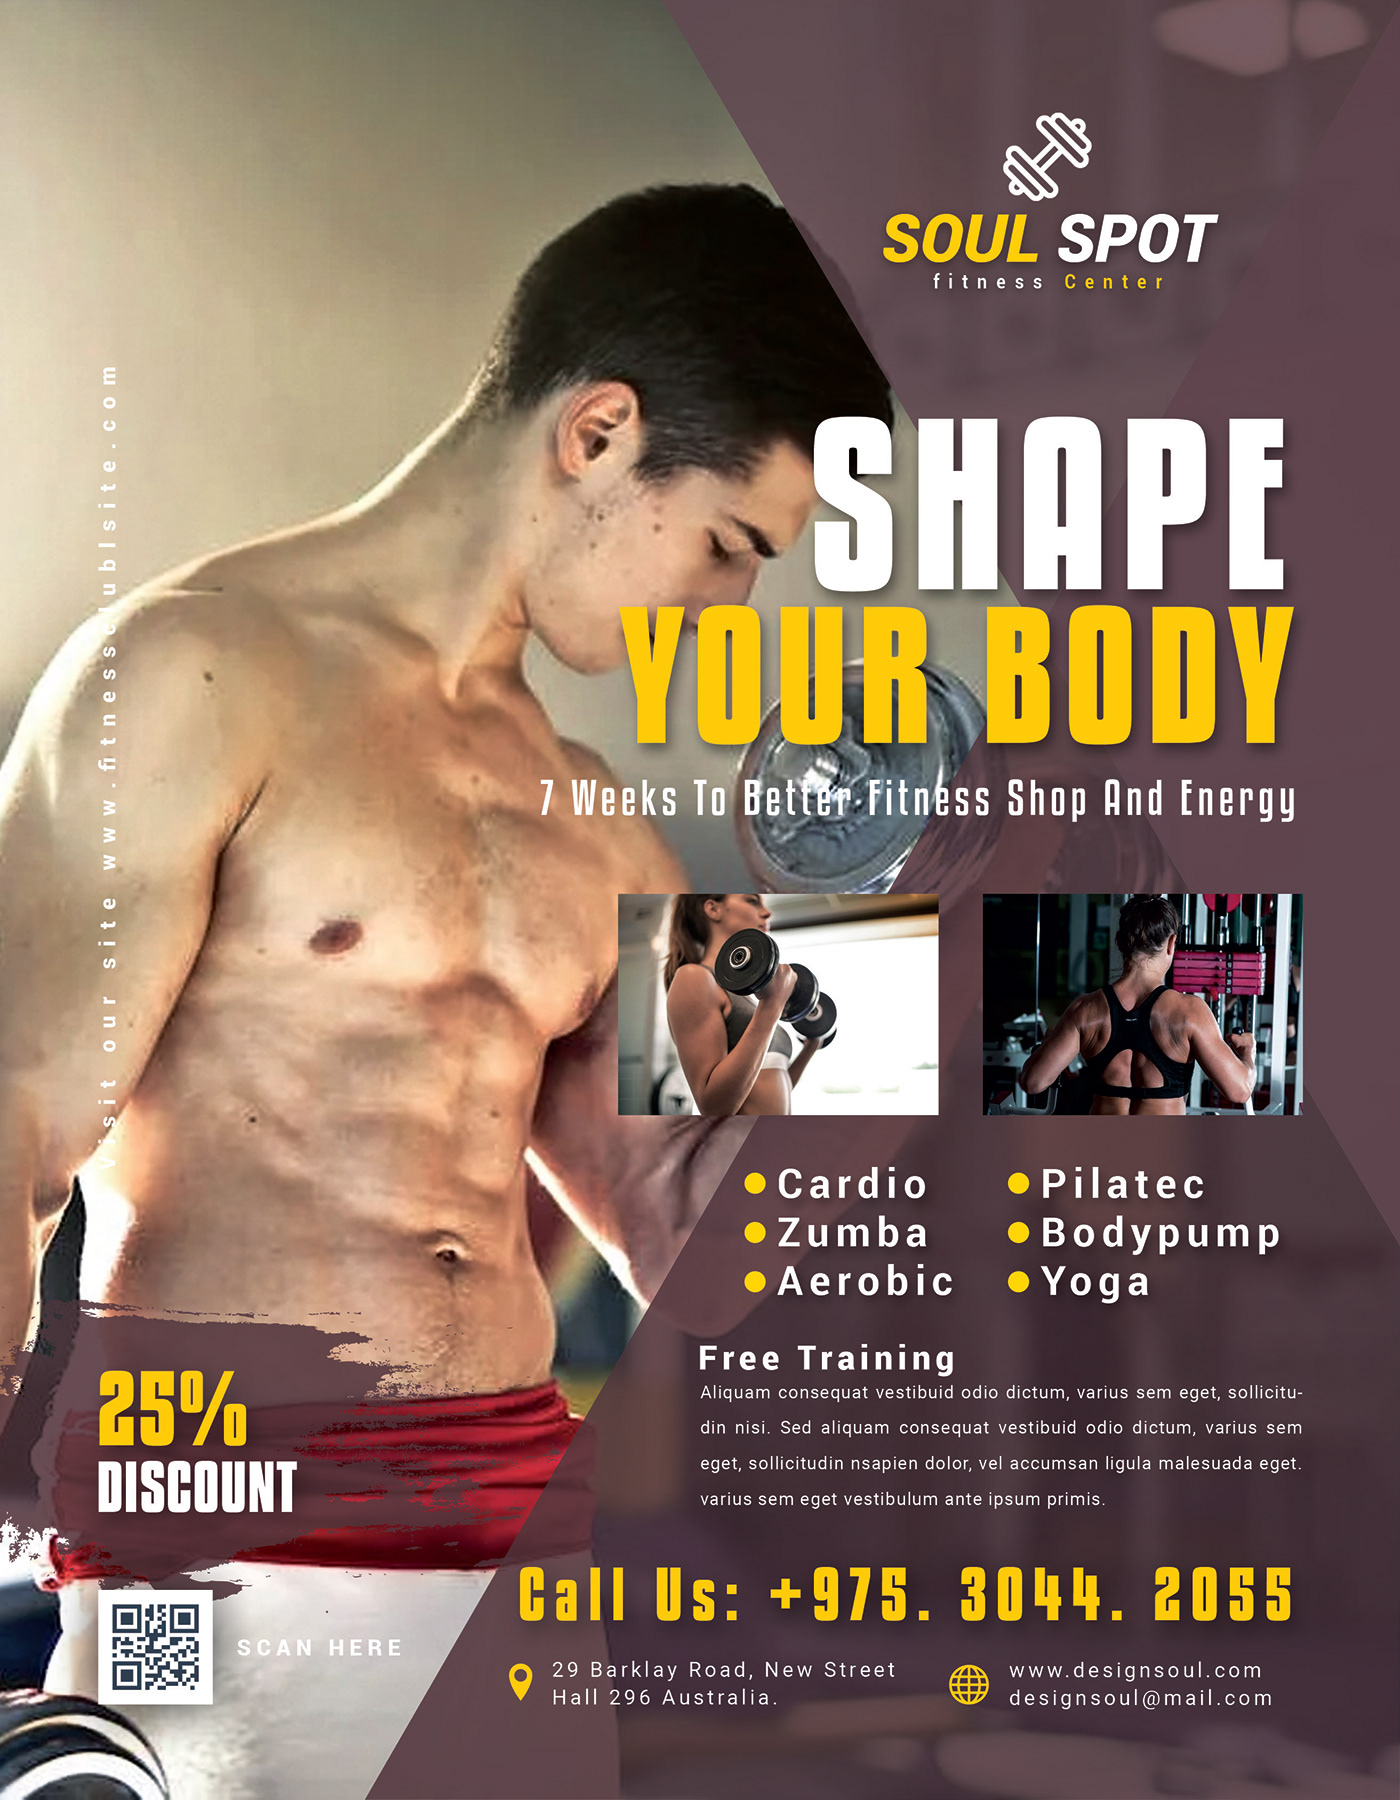 gym banner bodybuilder healthy fitness fitness banner BodyBuilding Fitness Gym sport Promotion shape your body